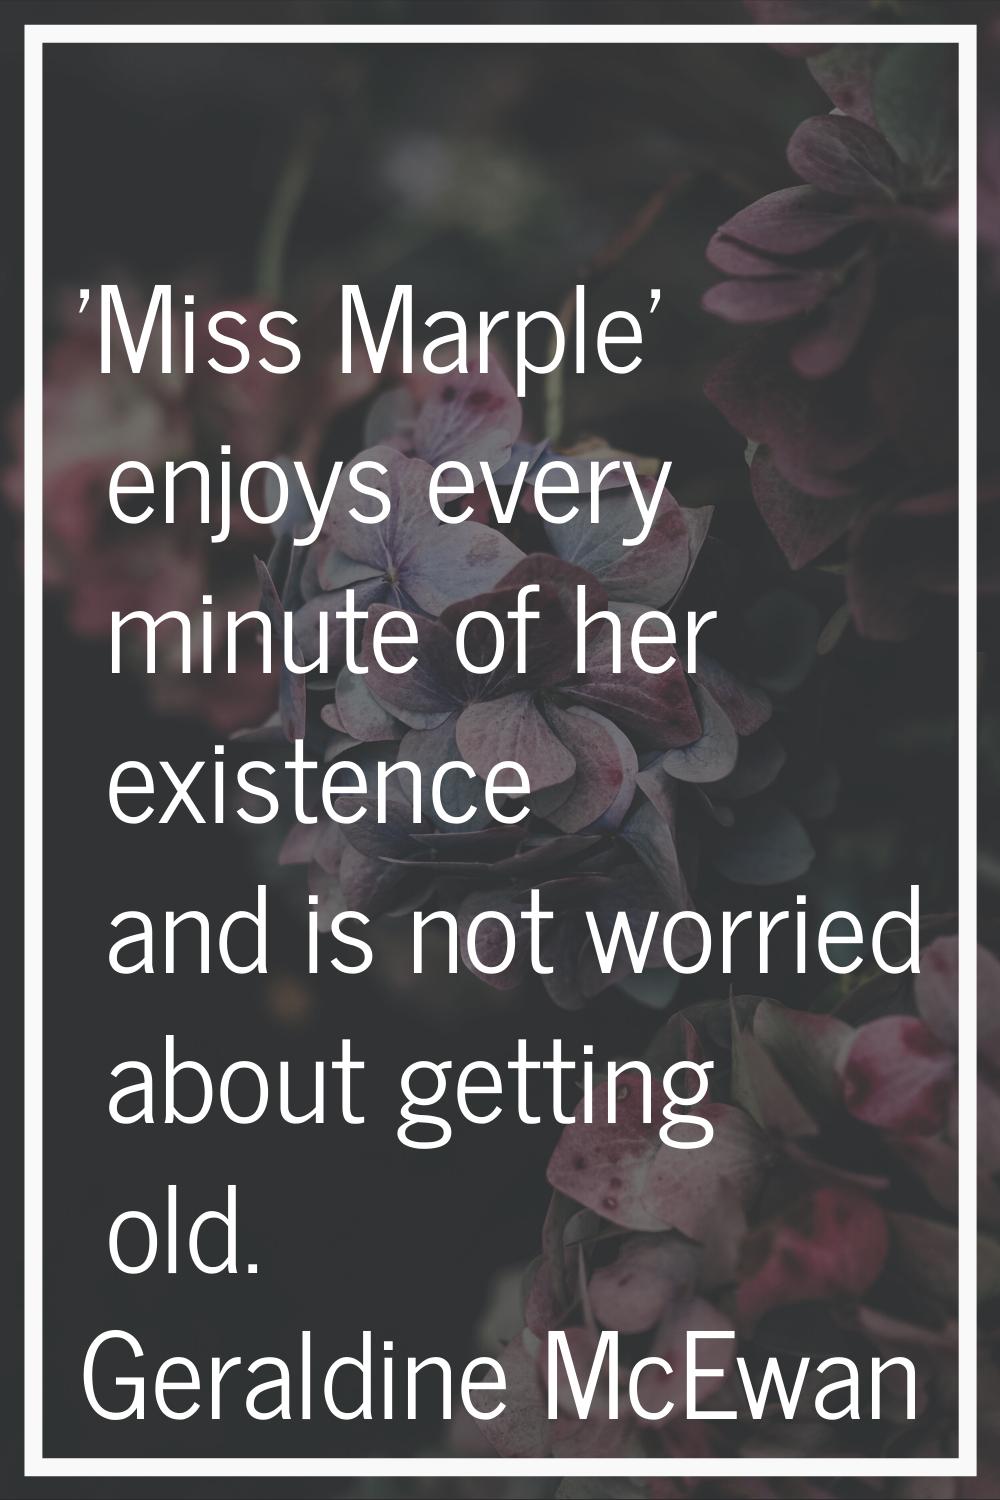 'Miss Marple' enjoys every minute of her existence and is not worried about getting old.